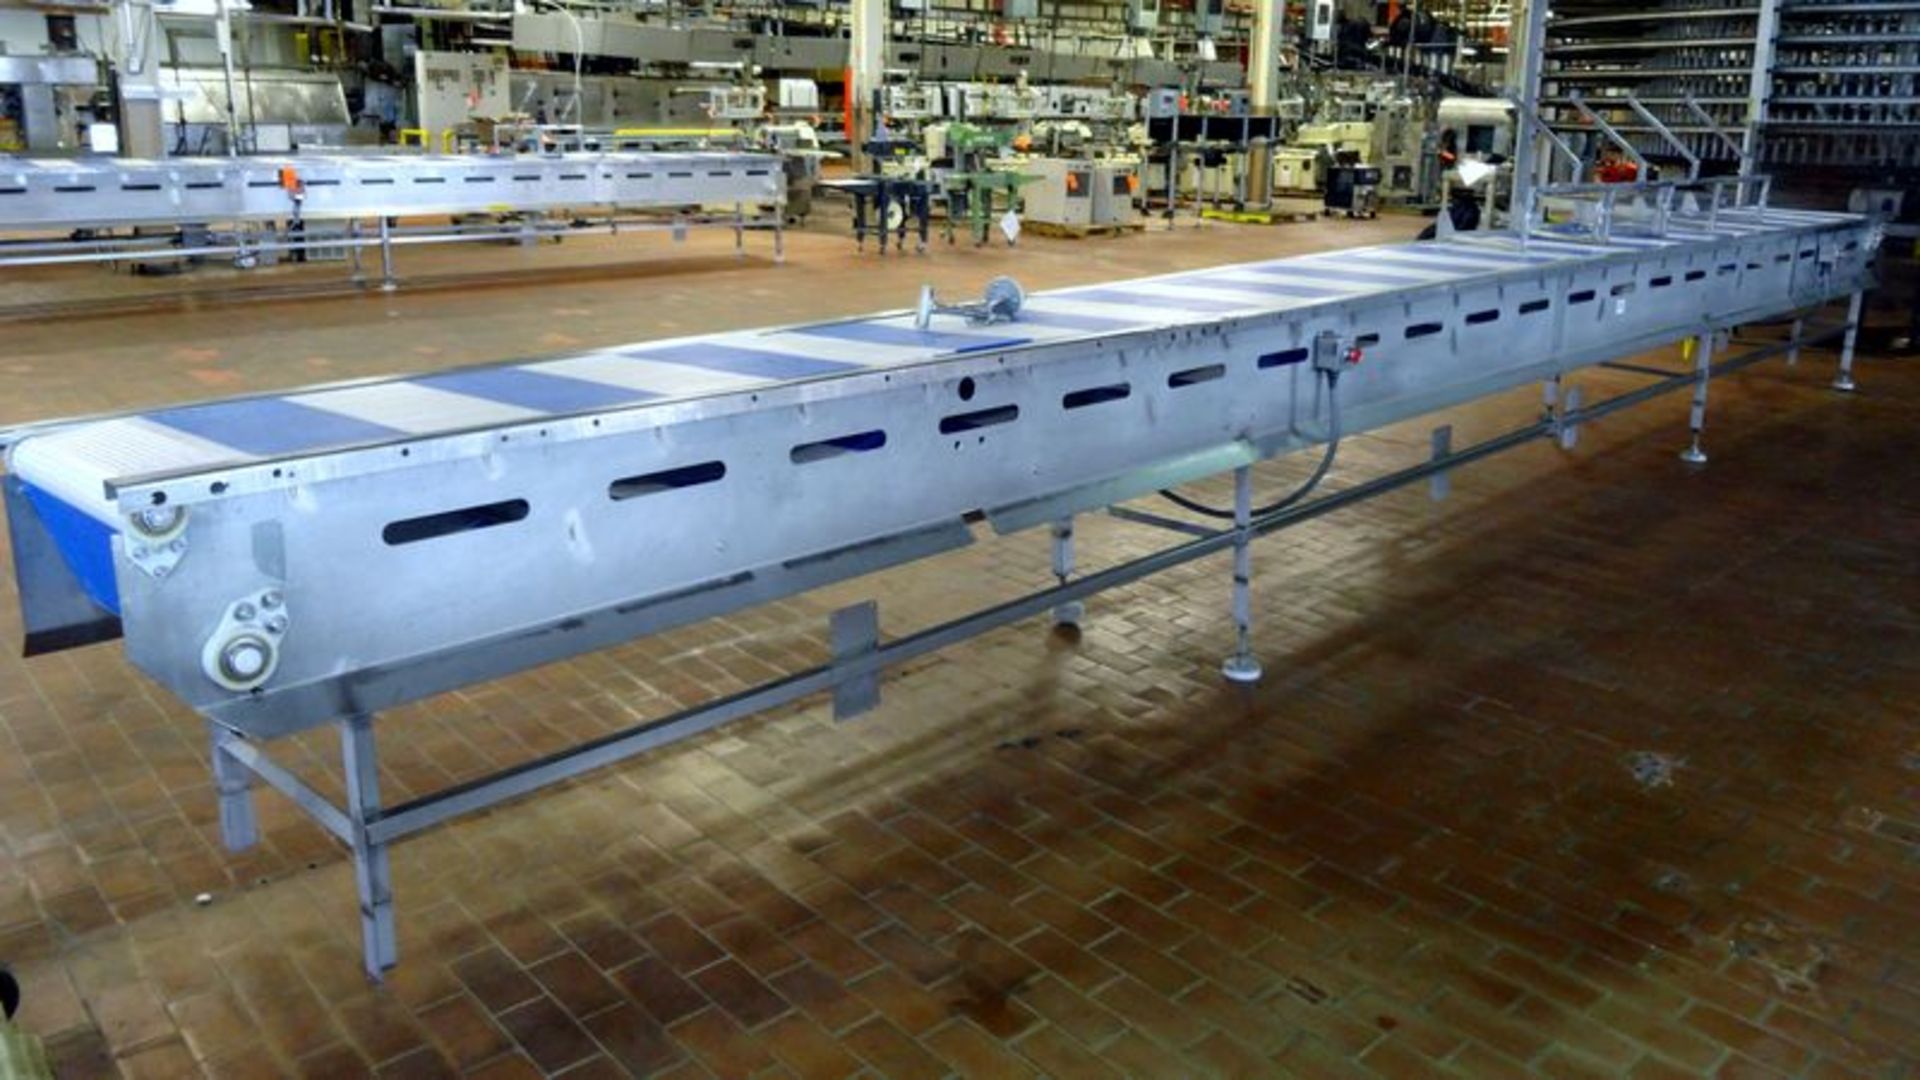 E-Quip plastic belt conveyor. Approximate 24" wide x 30' long. Stainless steel frame, no motor. - Image 3 of 5